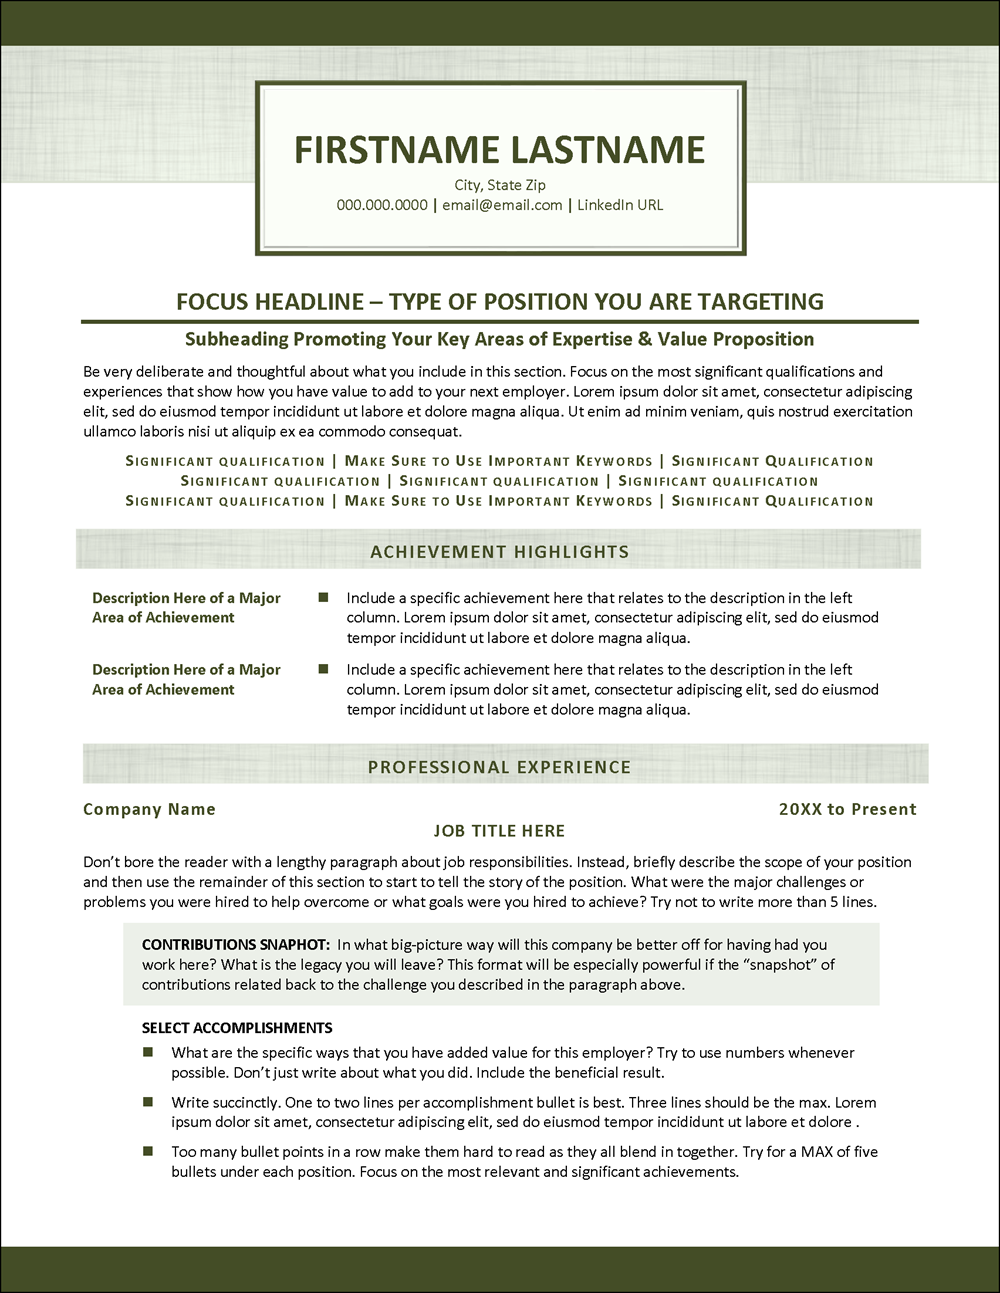 Resume Template for Professional Jobs Page 1